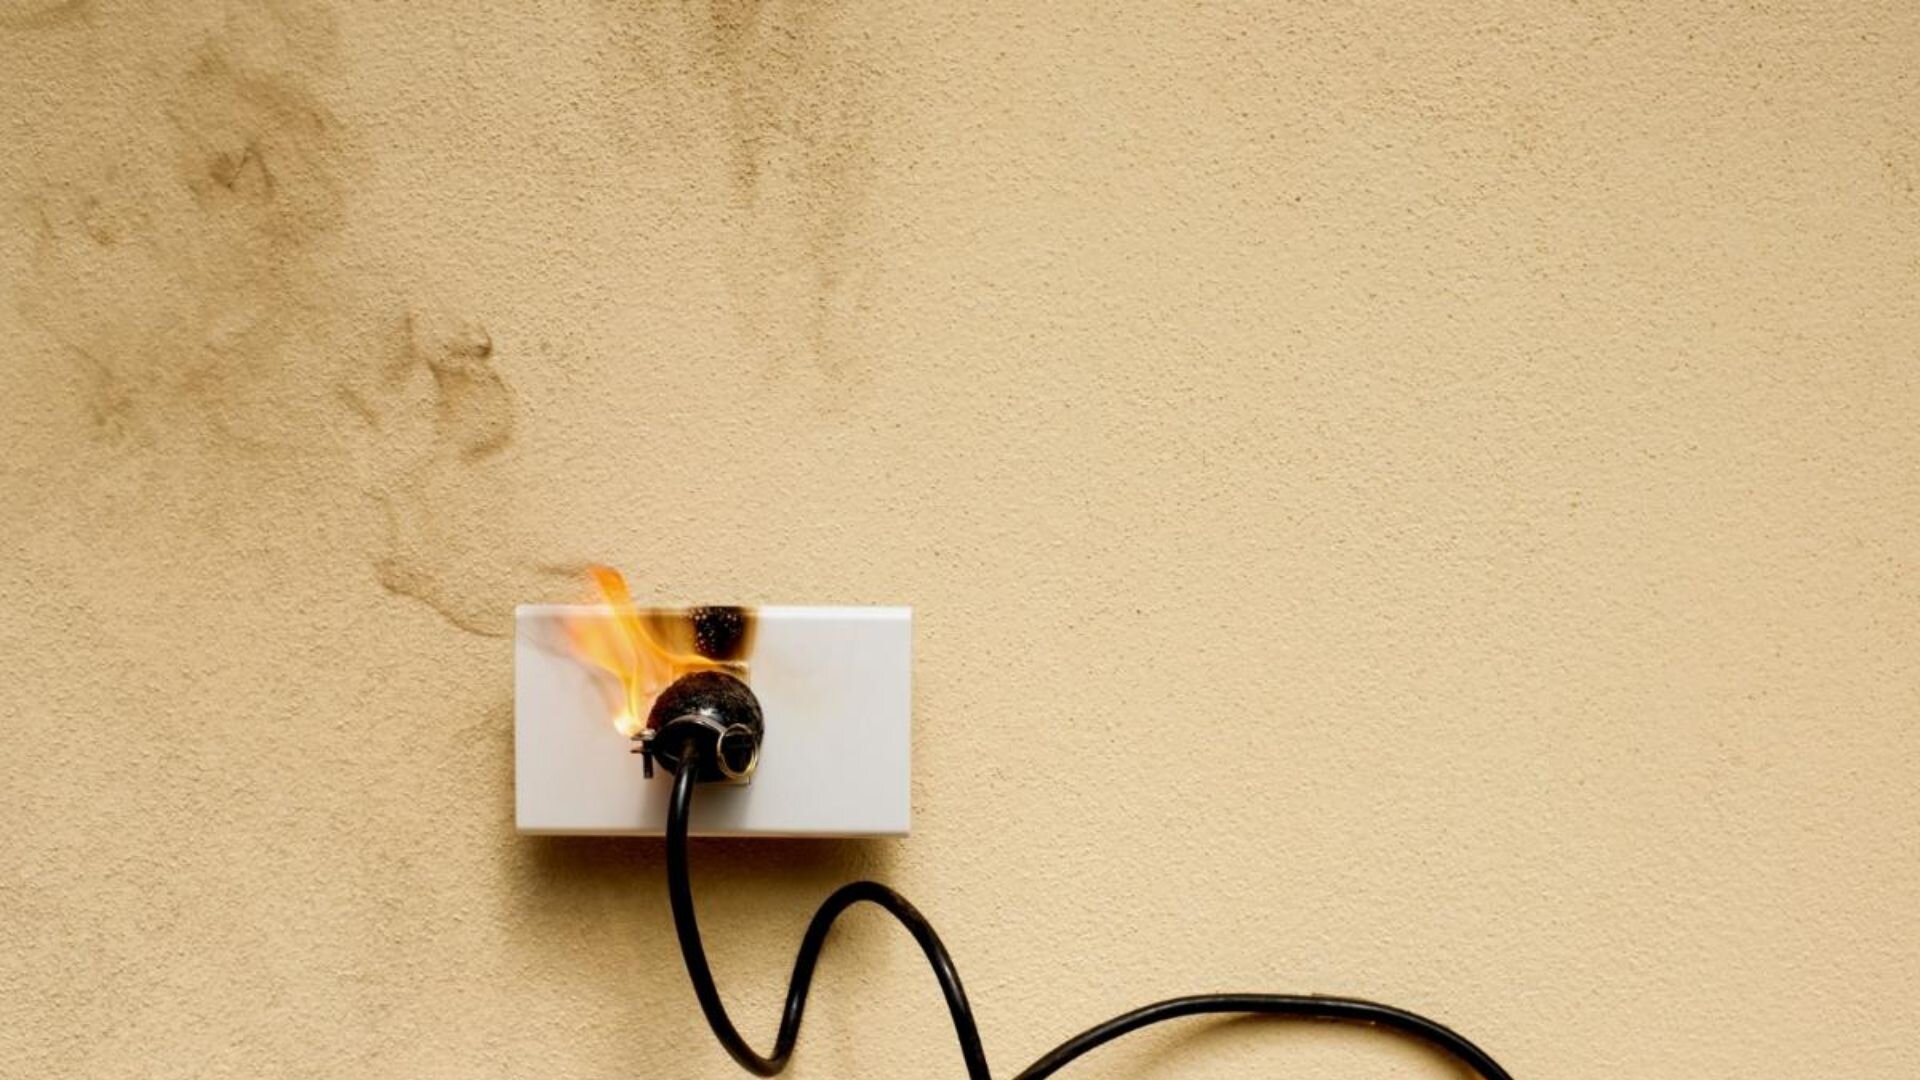 Troubleshooting a Hot or Sparking Electrical Outlet: Warning Signs, Causes  & Fixes ‐ Bright Force Electrical